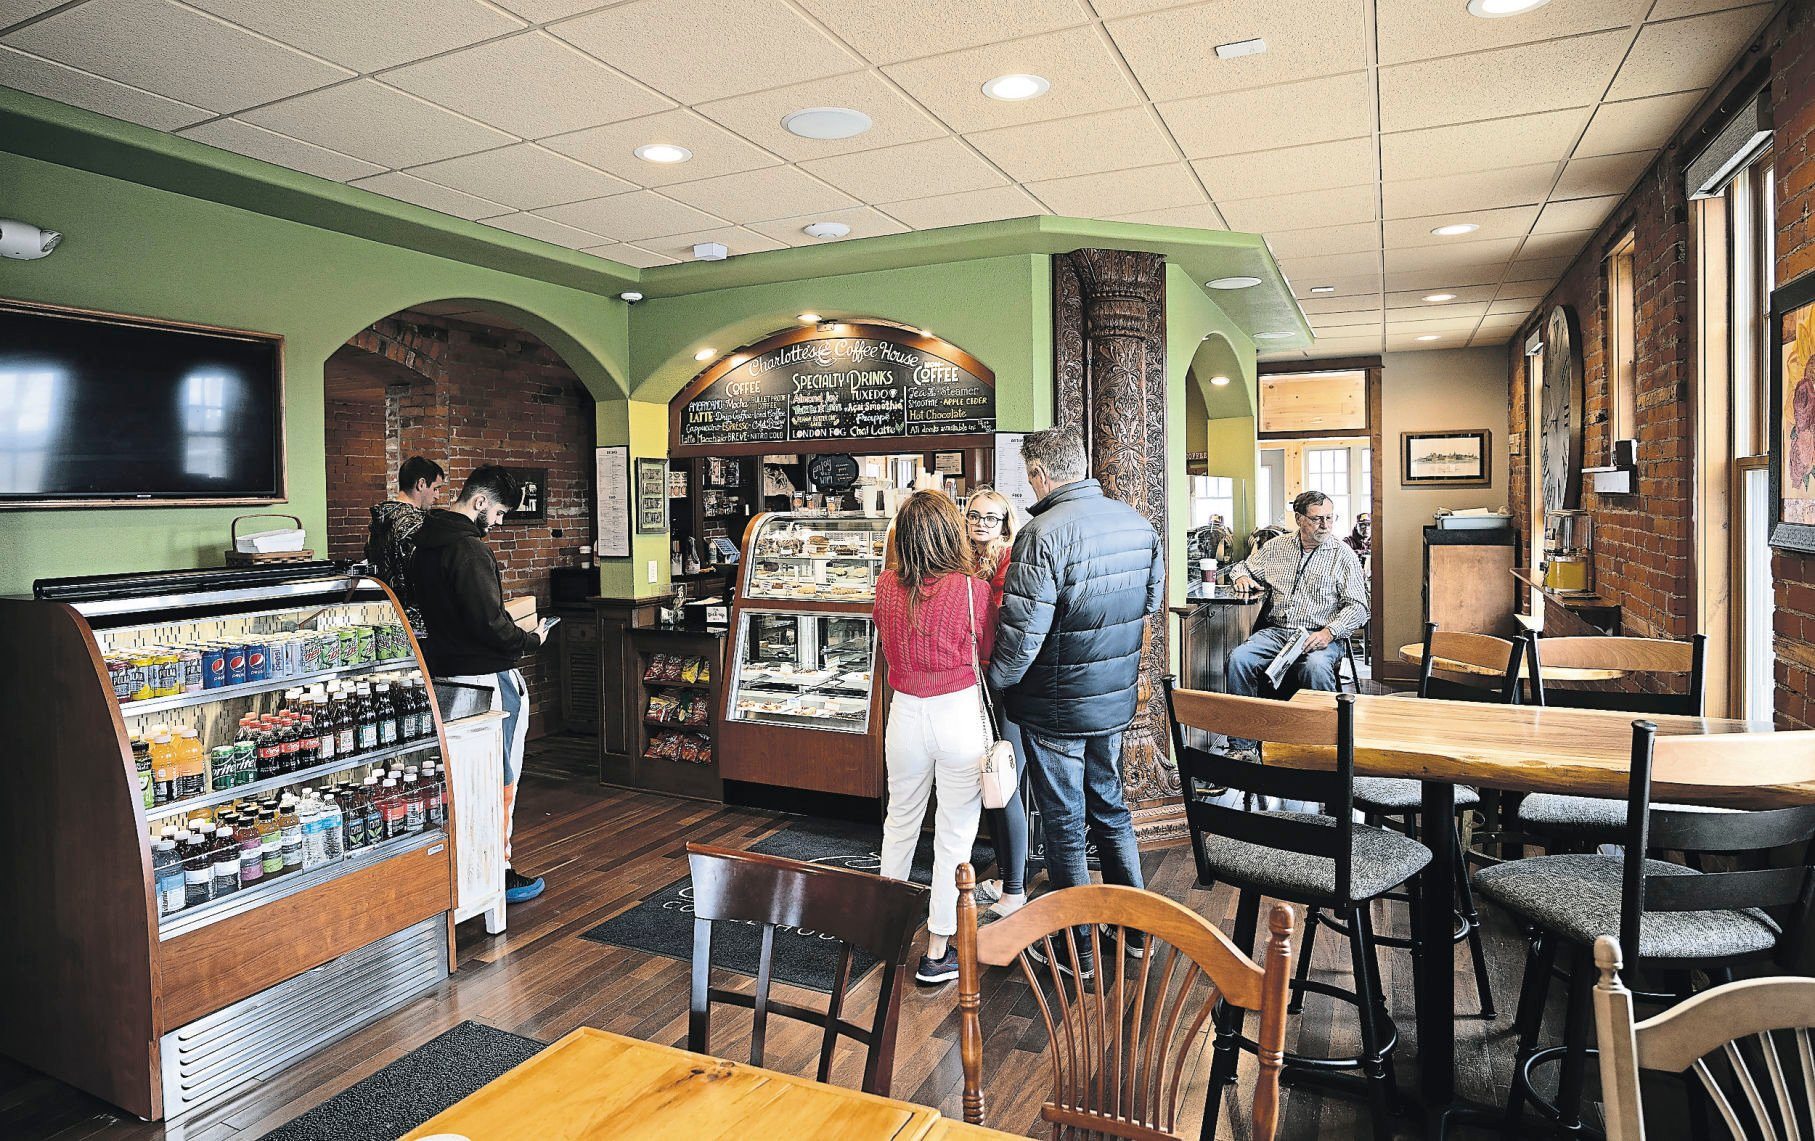 Customers wait on orders at Charlotte’s Coffee House in Dubuque on Saturday, April 16, 2022.    PHOTO CREDIT: Stephen Gassman